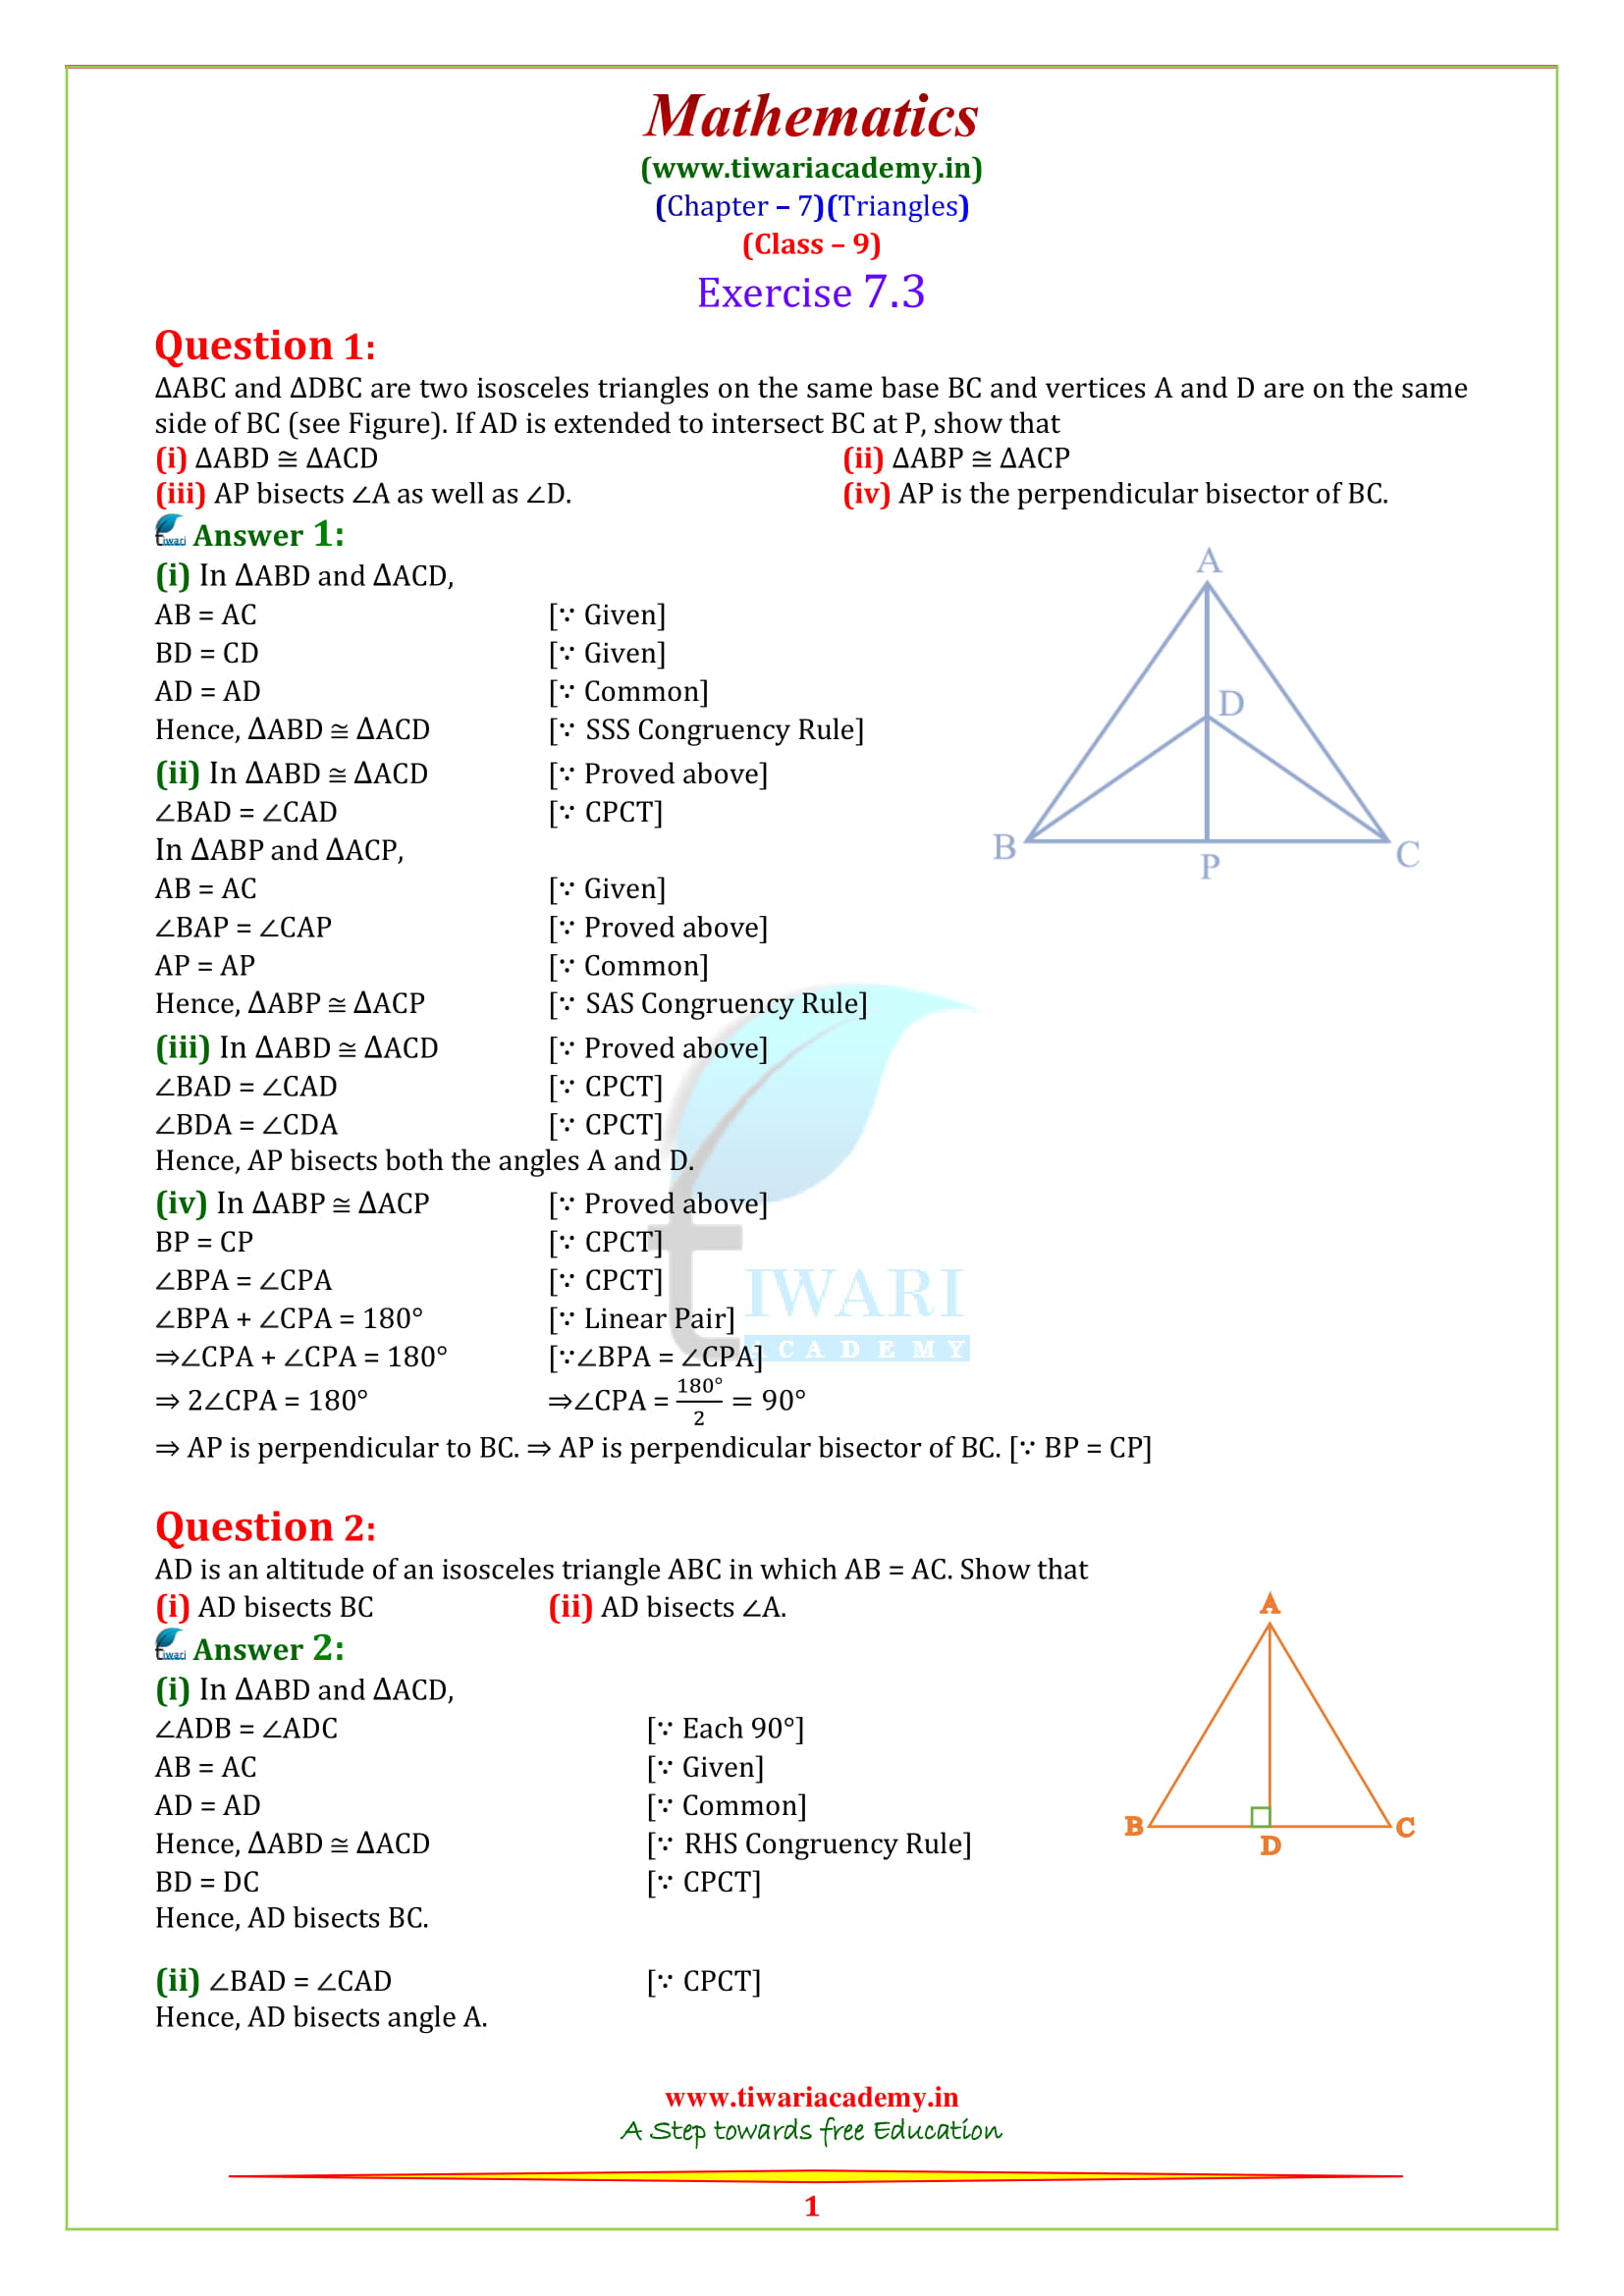 NCERT Solutions for class 9 maths chapter 7 Exerecise 7.3 in english medium pdf